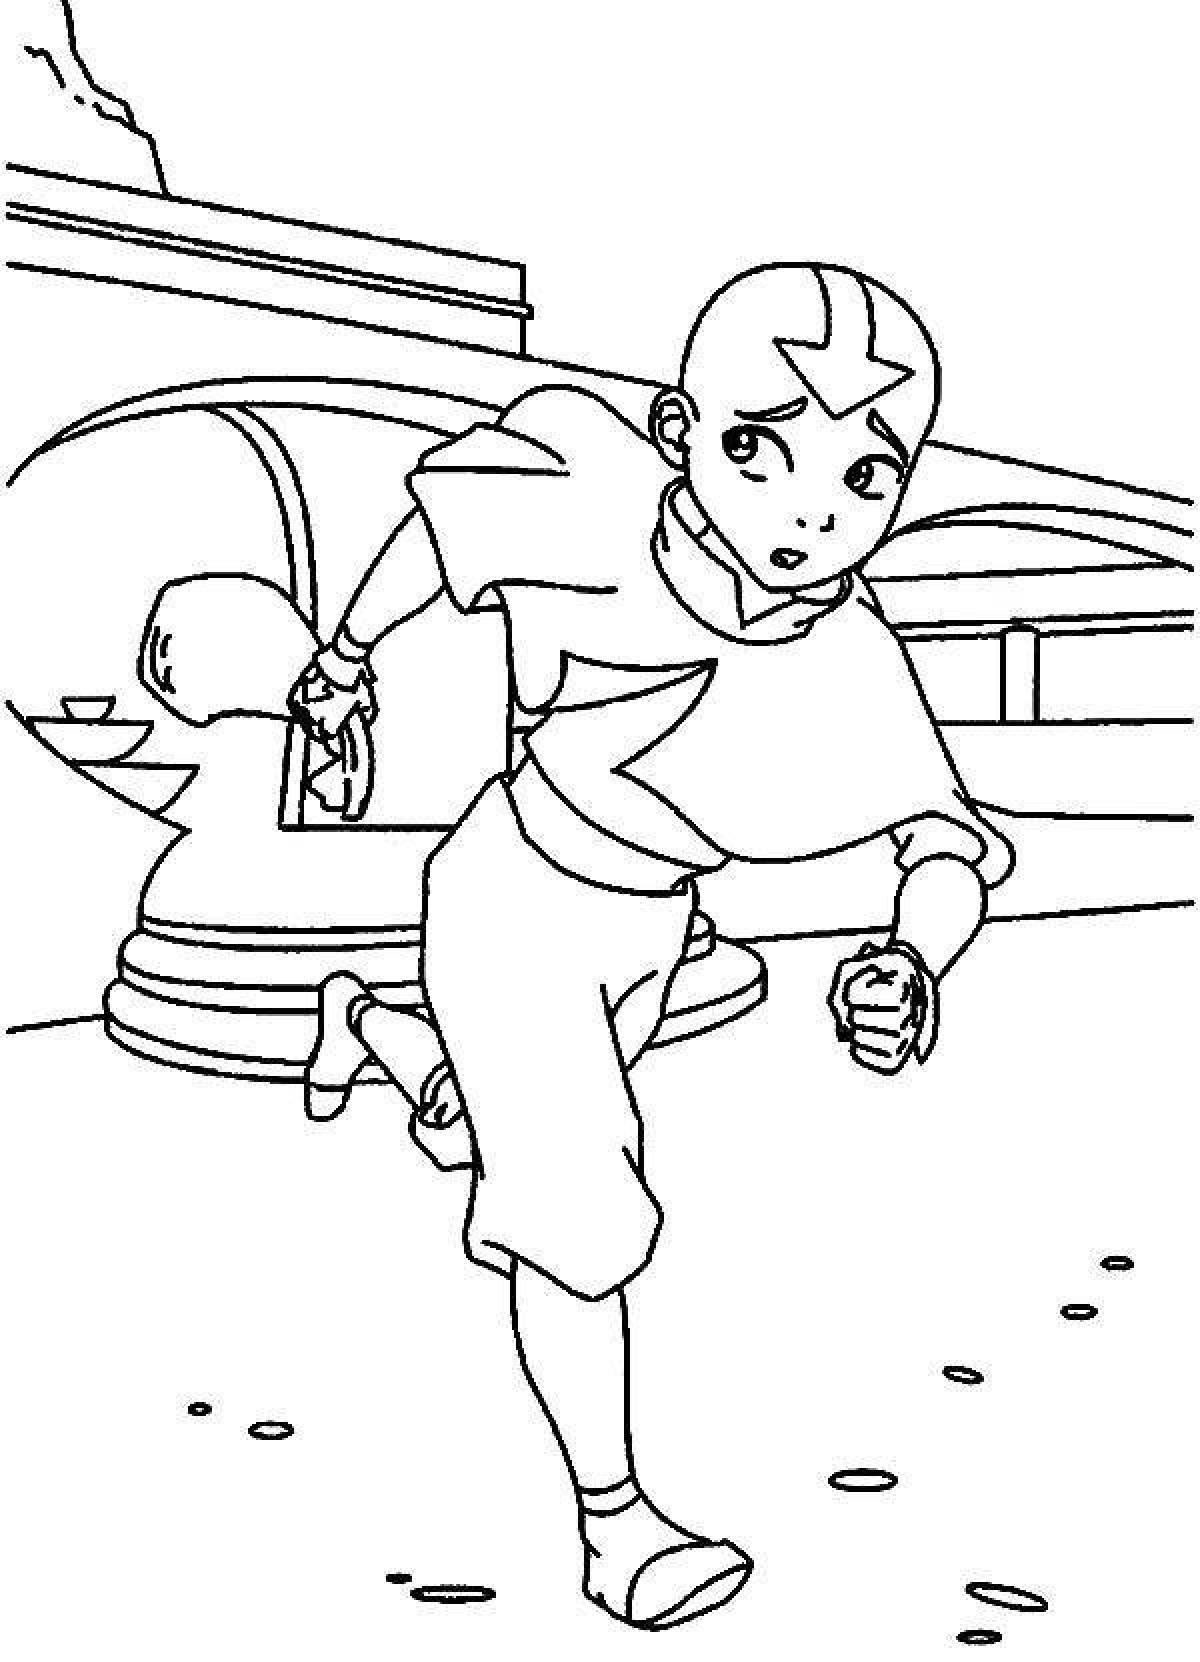 Radiant avatar: the legend of aang coloring page